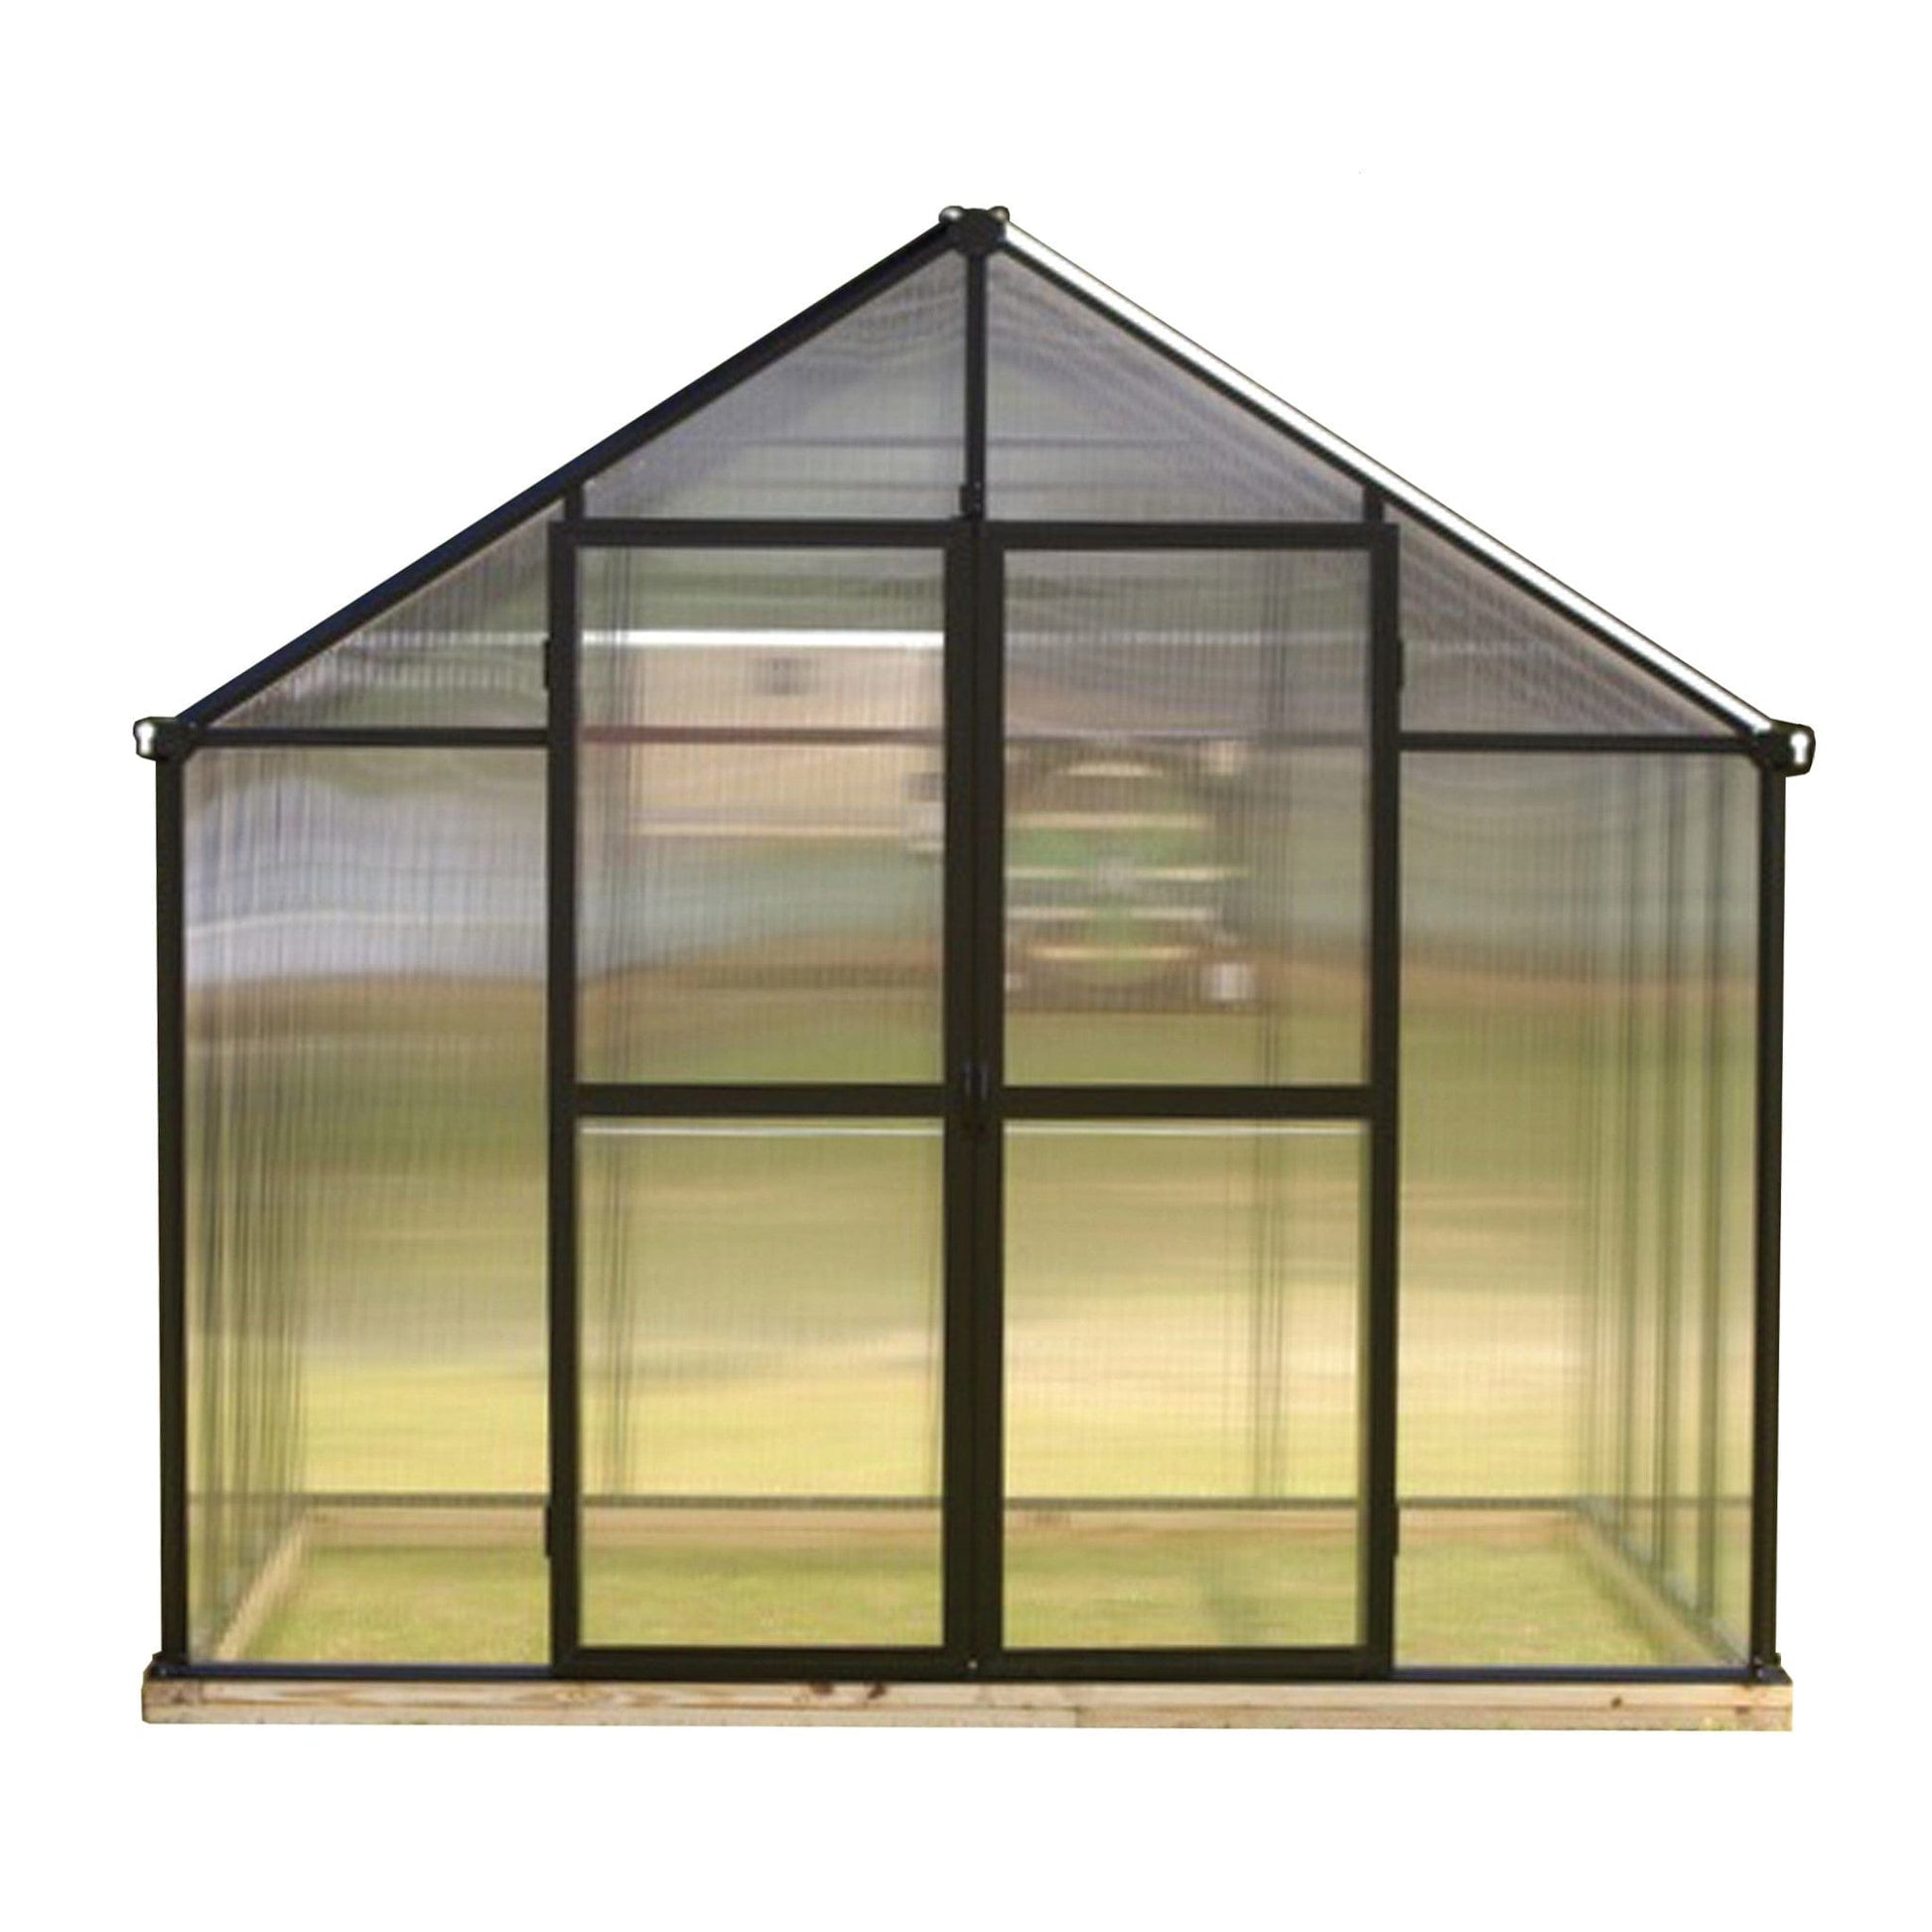 Riverstone Industries Double Hinged French Doors for Monticello Greenhouse - mygreenhousestore.com